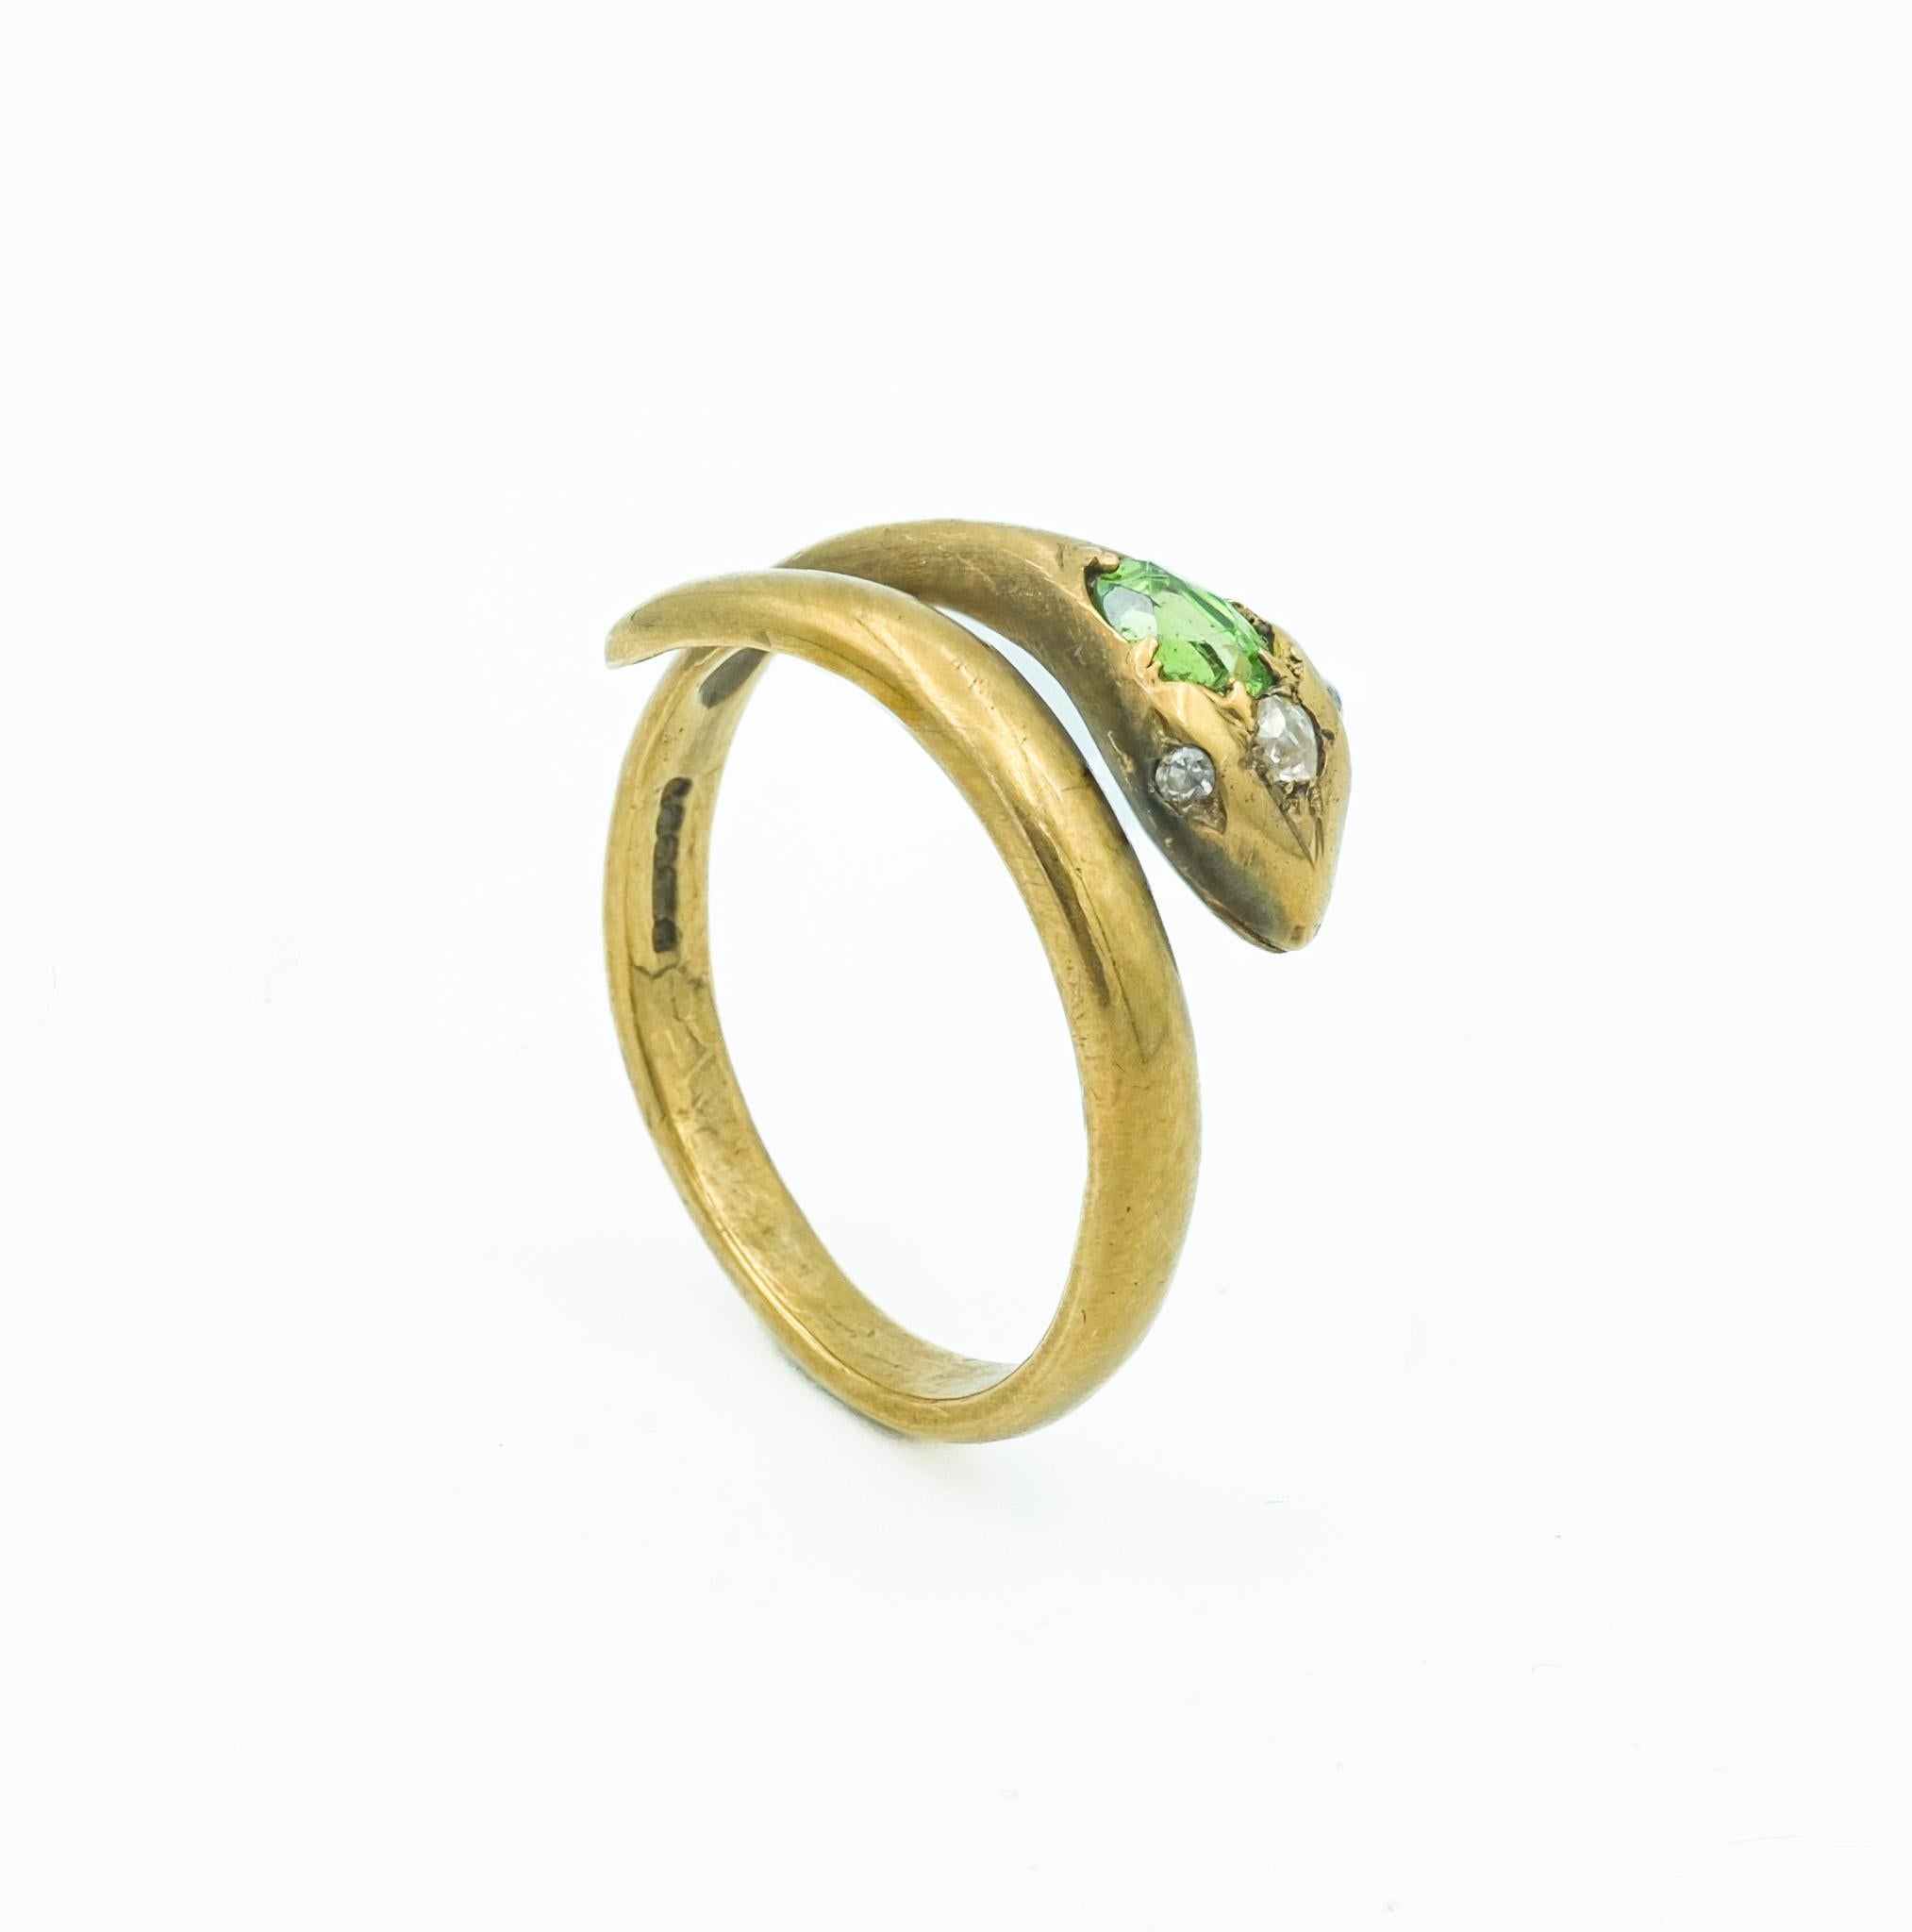 Discover the mystique of this enchanting 9 karat gold snake ring, a masterpiece of British craftsmanship. This piece features a stunning demantoid garnet as the snake's head, its vibrant green hue capturing the essence of nature's beauty.